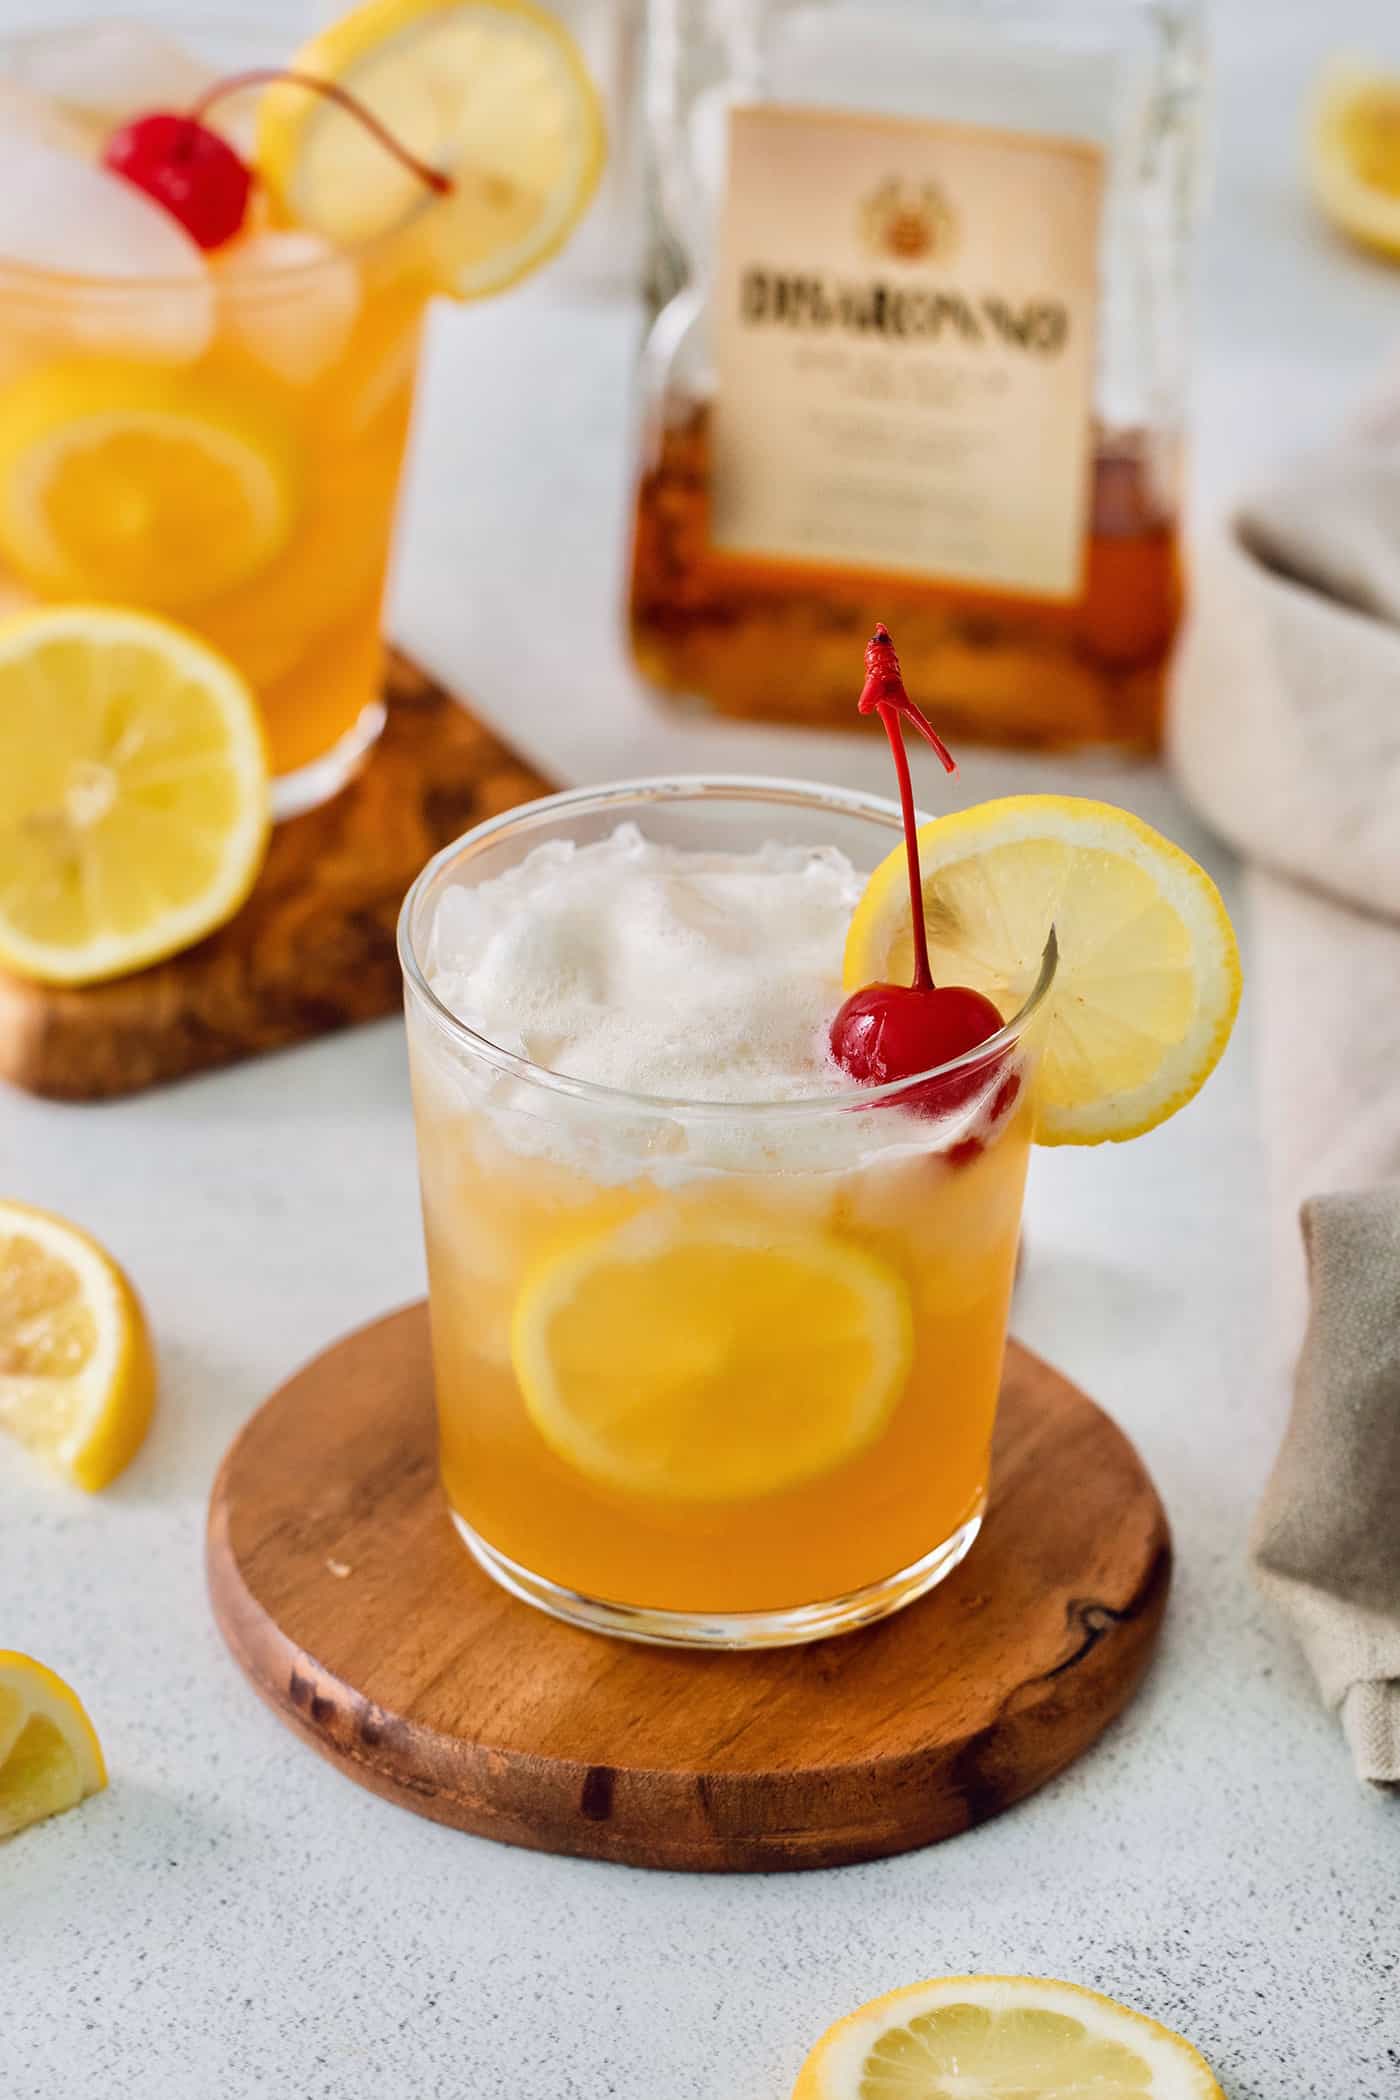 Glasses of amaretto sour are garnished with lemon slices and cherries, with a bottle of amaretto shown in the background.